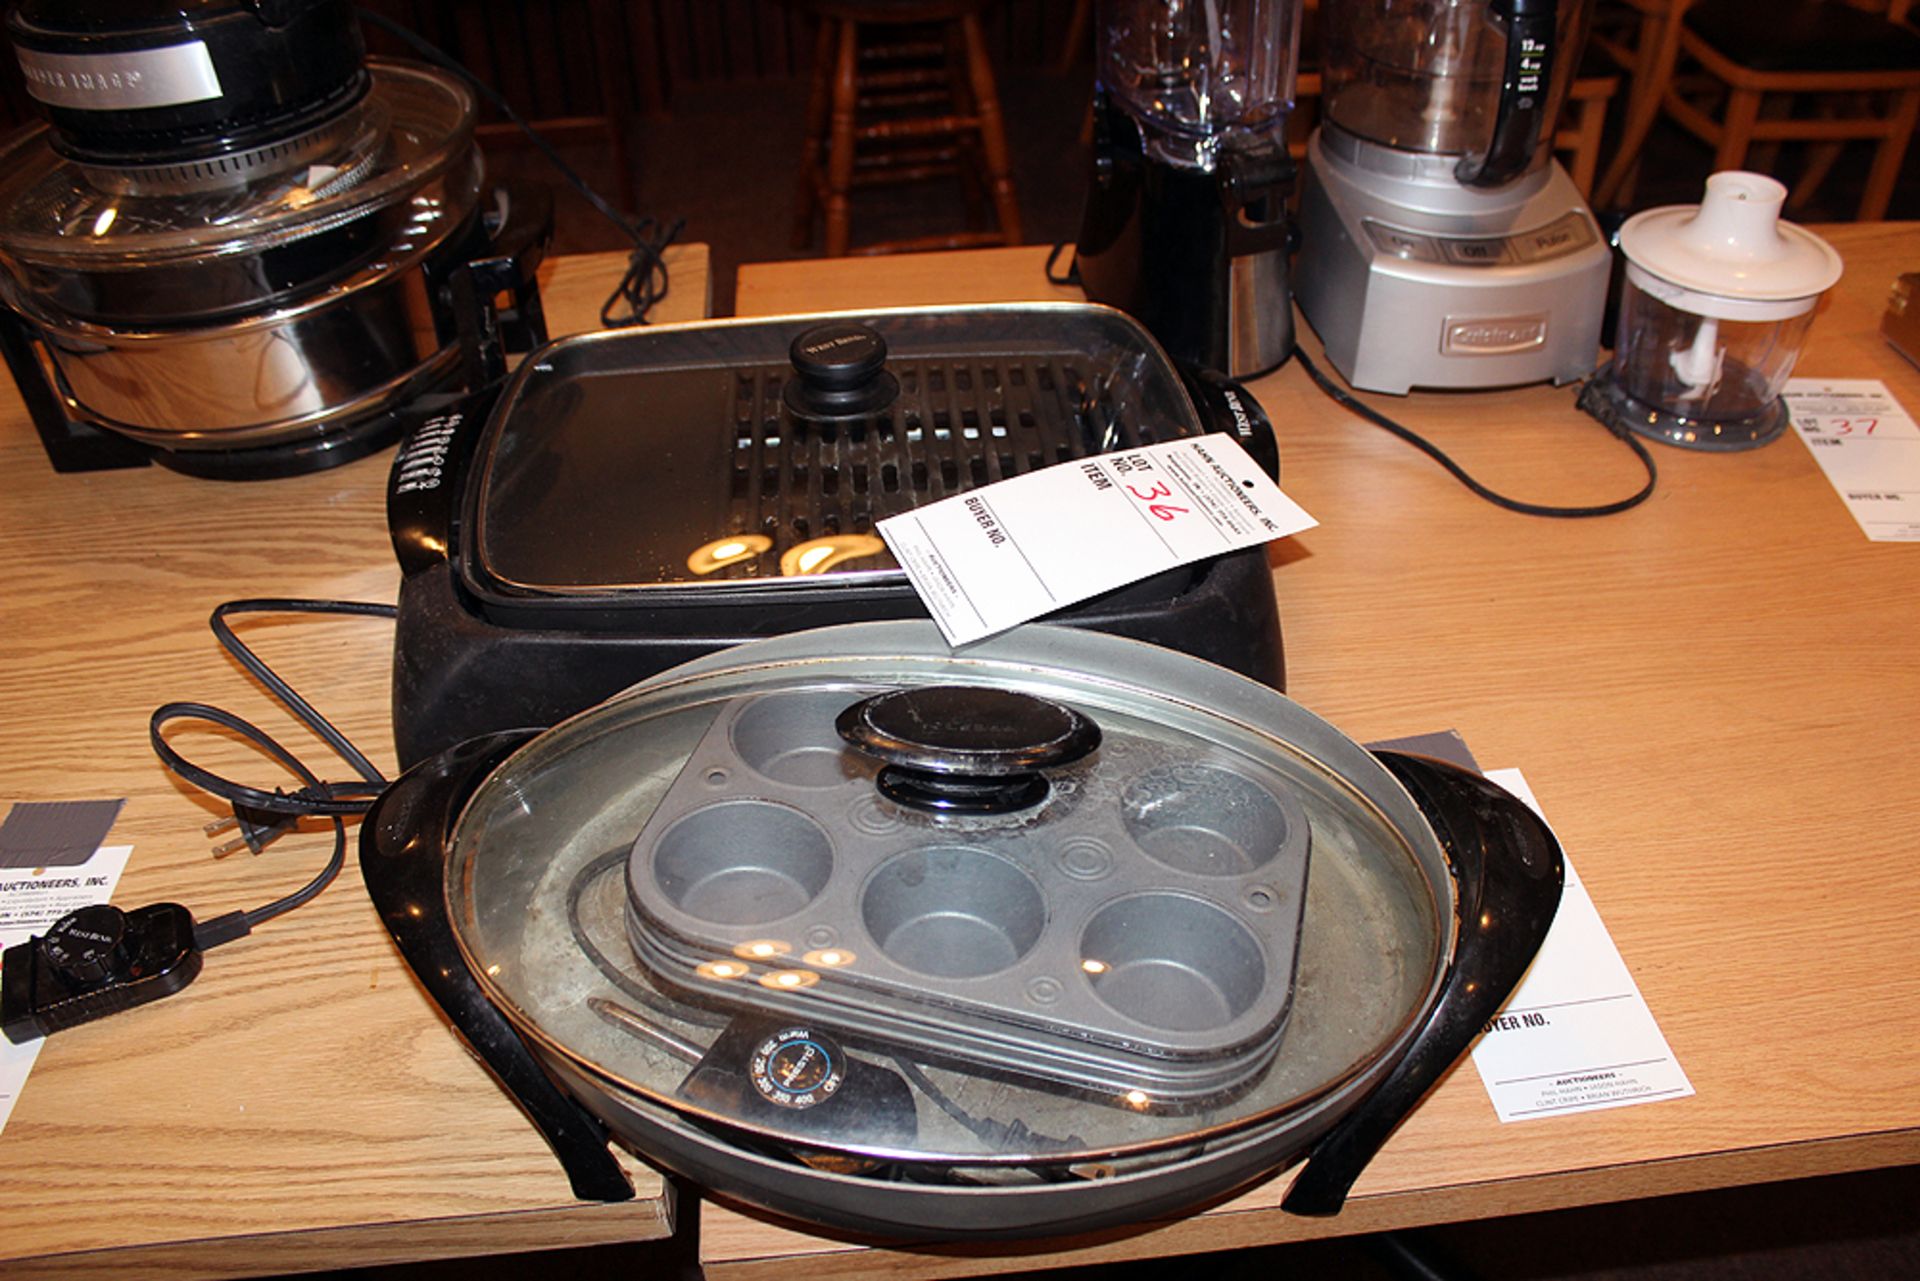 Electric skillet and Westbend broiler/griddle